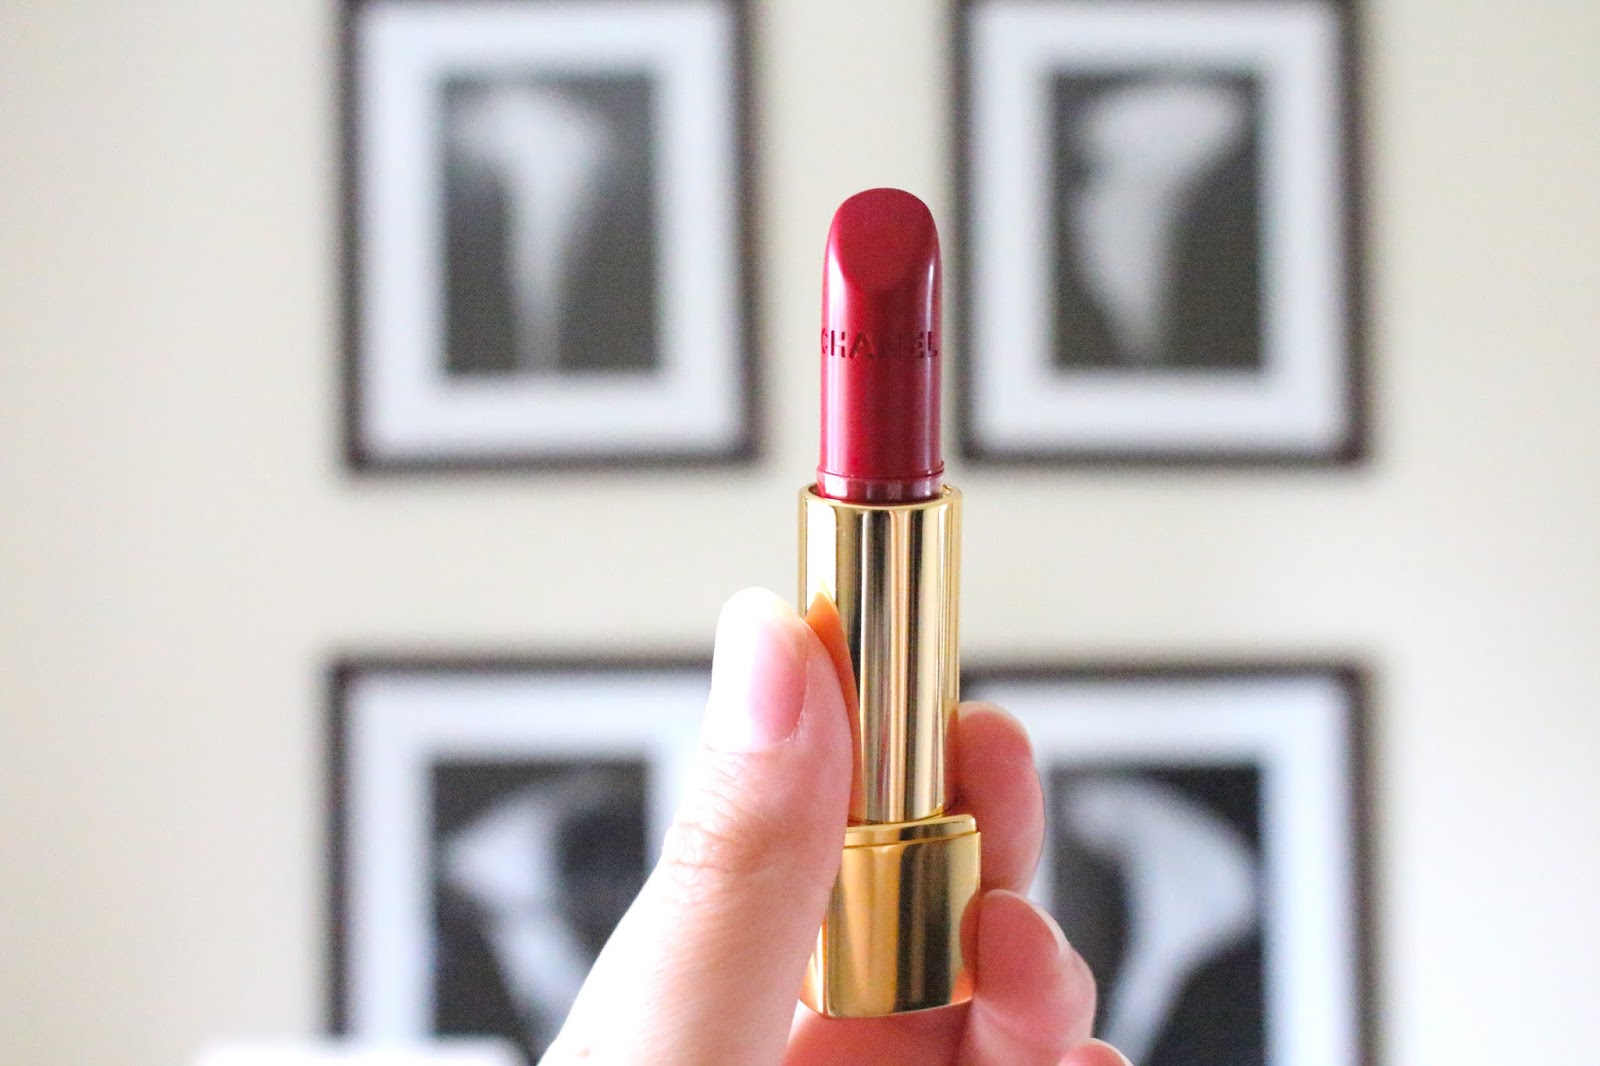 Chanel Rouge Allure 99 Pirate Lipstick (Detailed Review & Swatches)